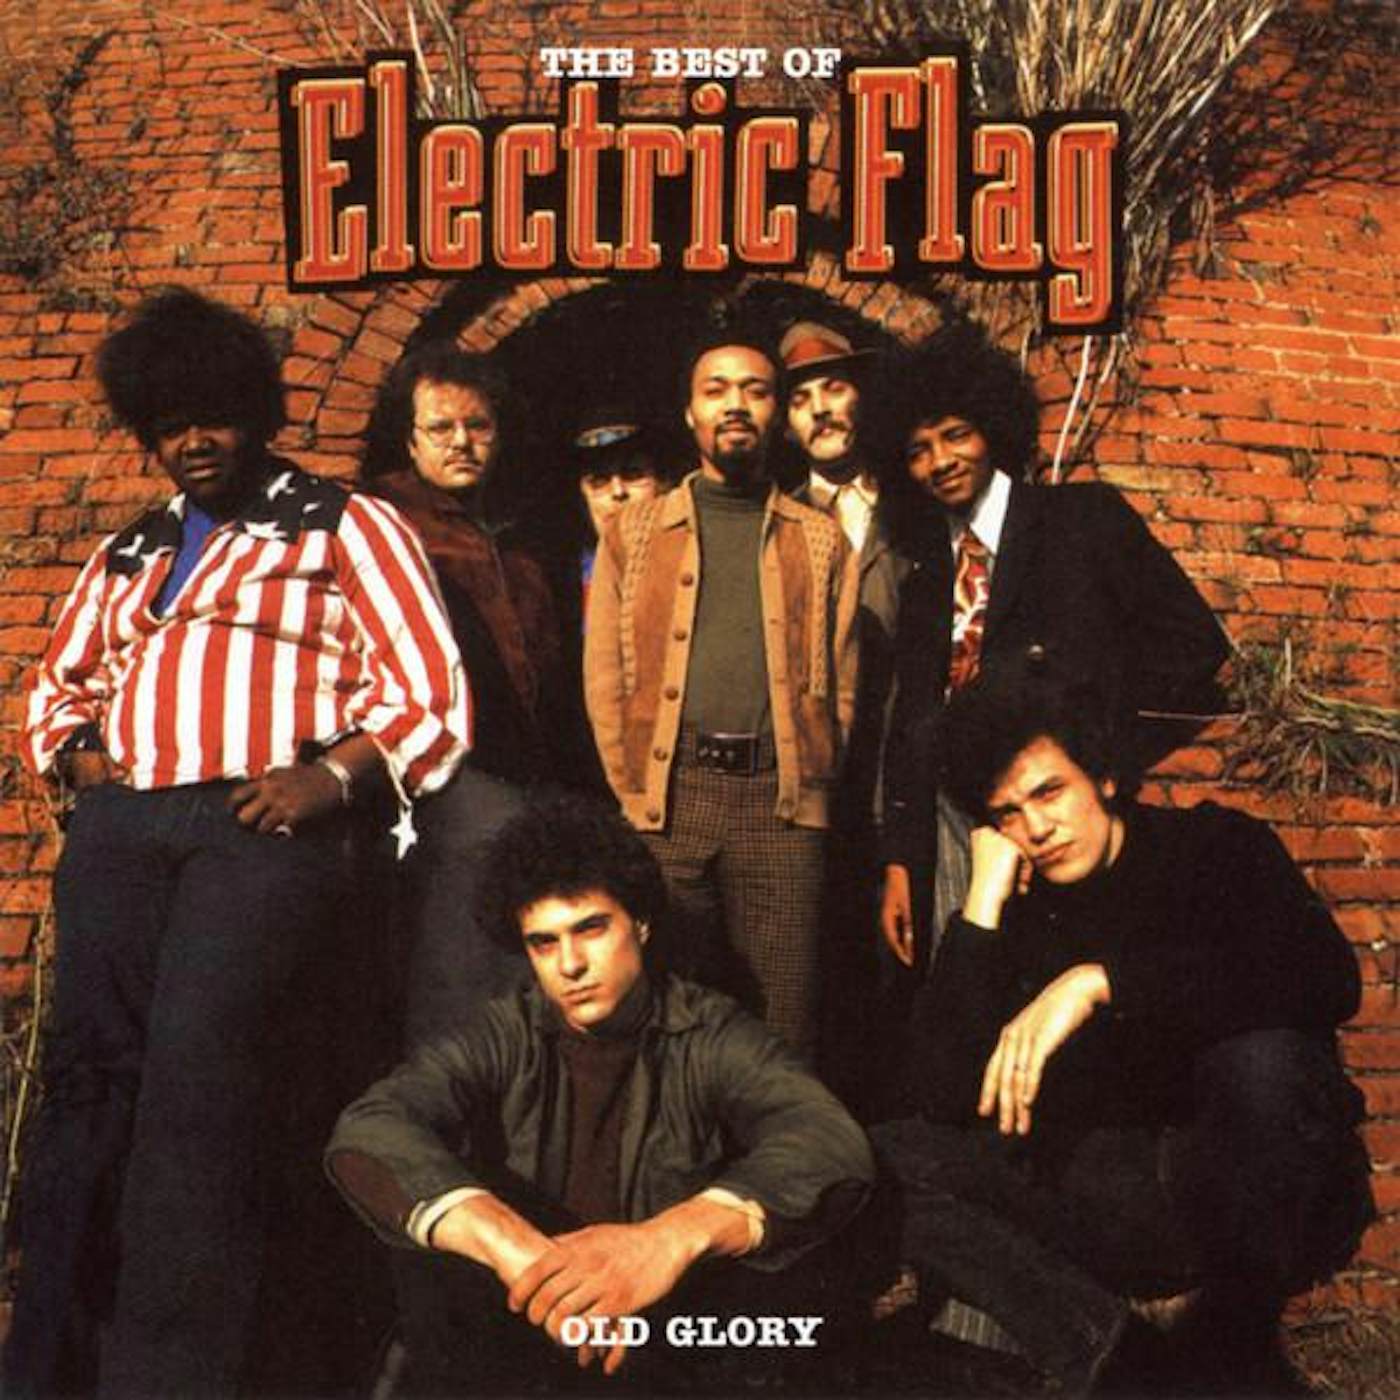 BEST OF The Electric Flag: AMERICAN MUSIC BAND CD